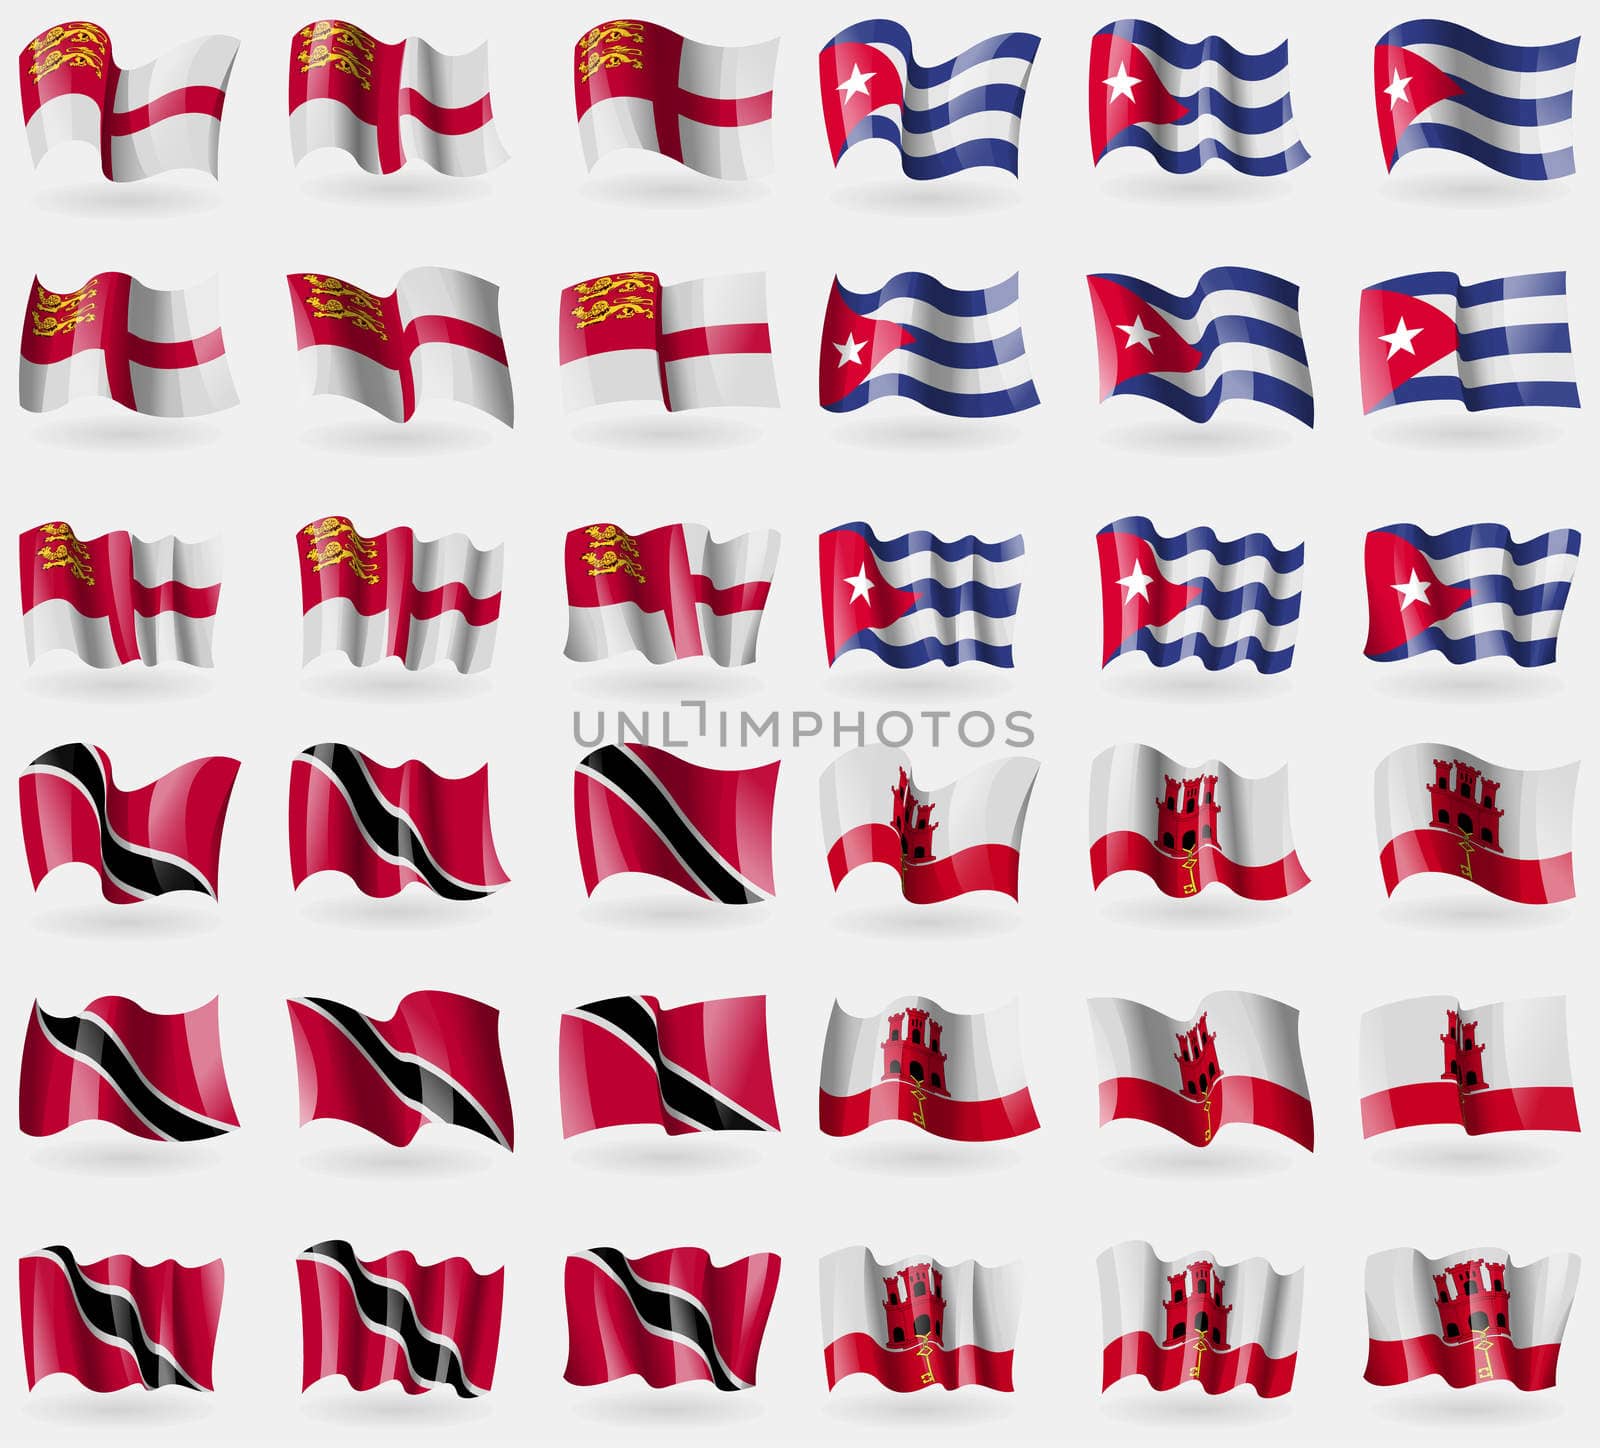 Sark, Cuba, Trinidad and Tobago, Gibraltar. Set of 36 flags of the countries of the world. illustration